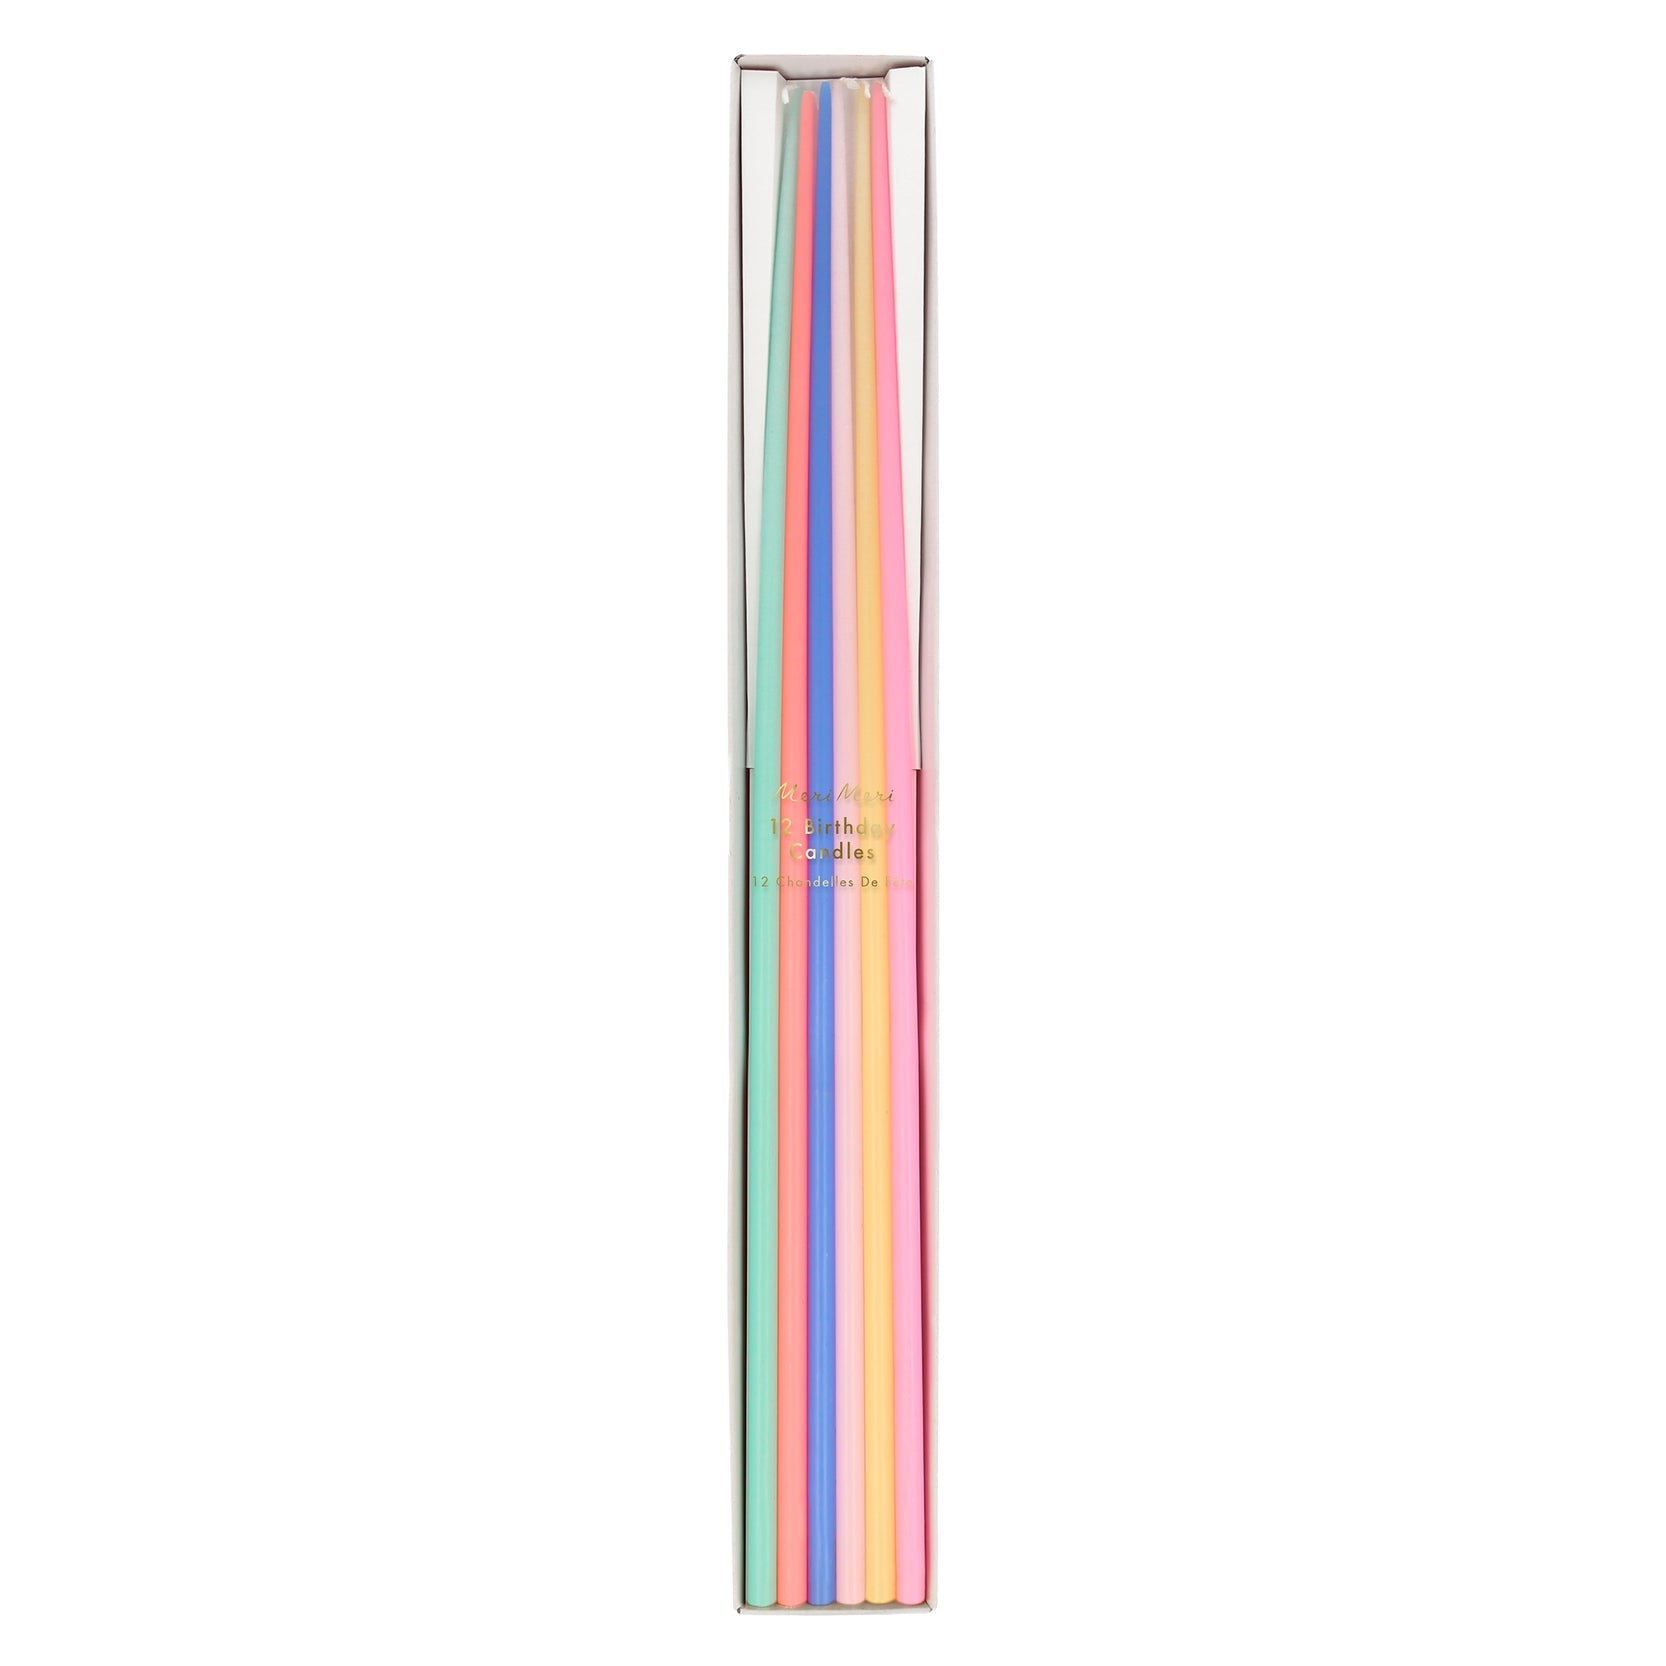 Mixed Tall Tapered Candles (x 12)